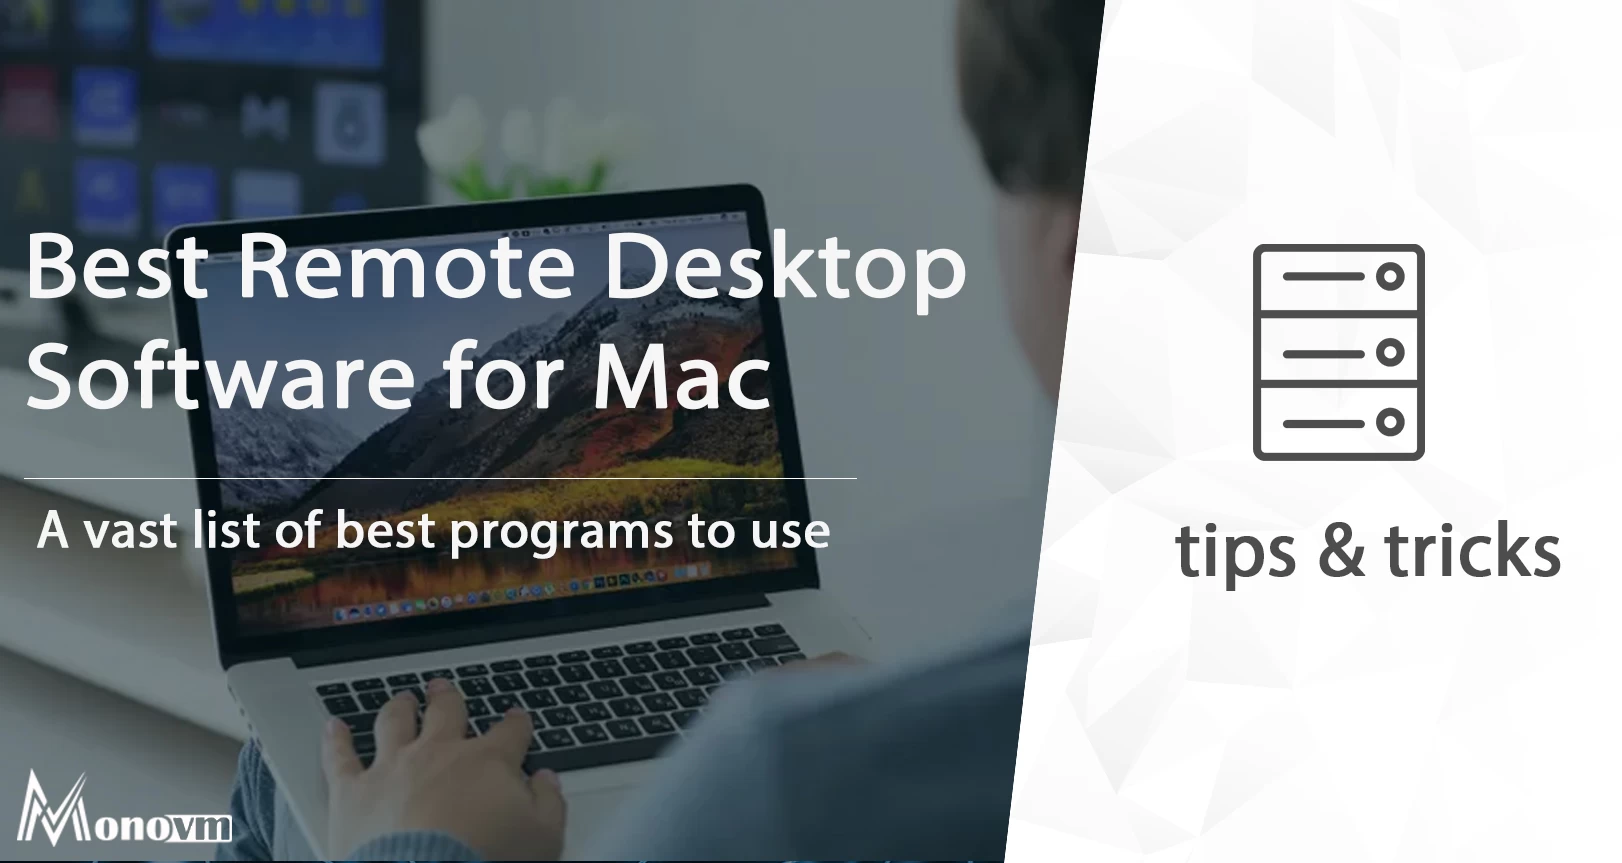 "The Ultimate Guide to Finding the Best Remote Desktop Software for Mac"